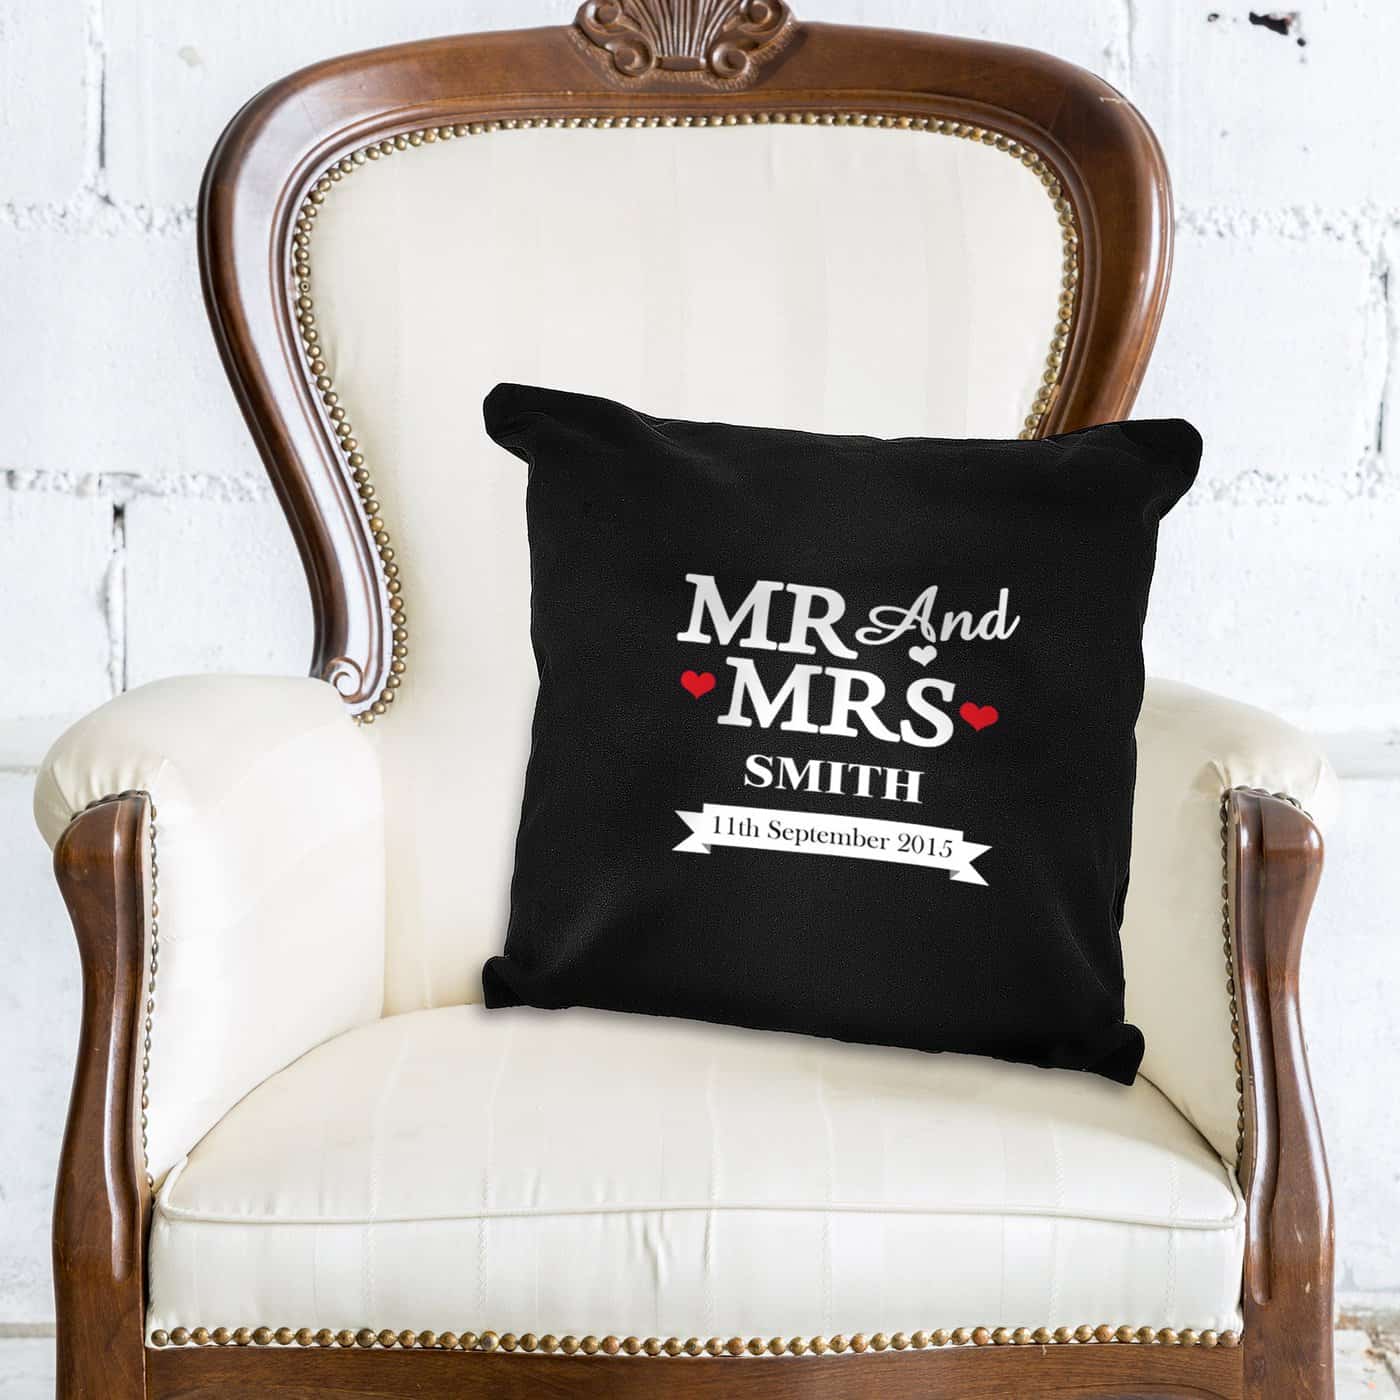 Give Personalised Gifts To Bride And Groom